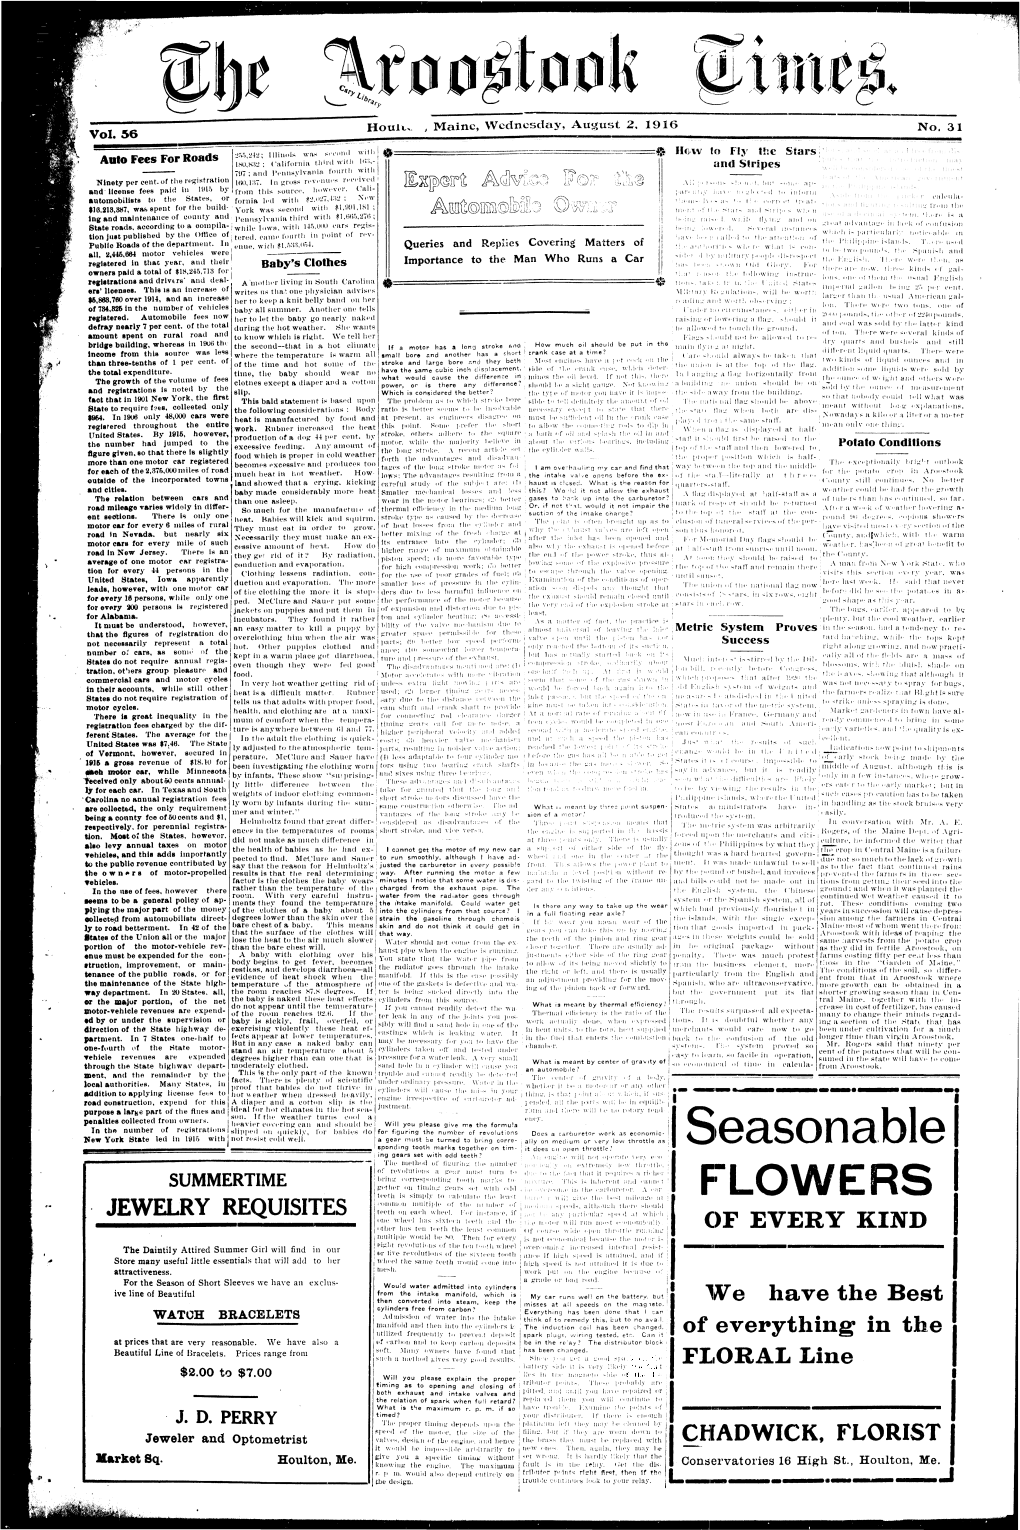 The Aroostook Times, August 2, 1916